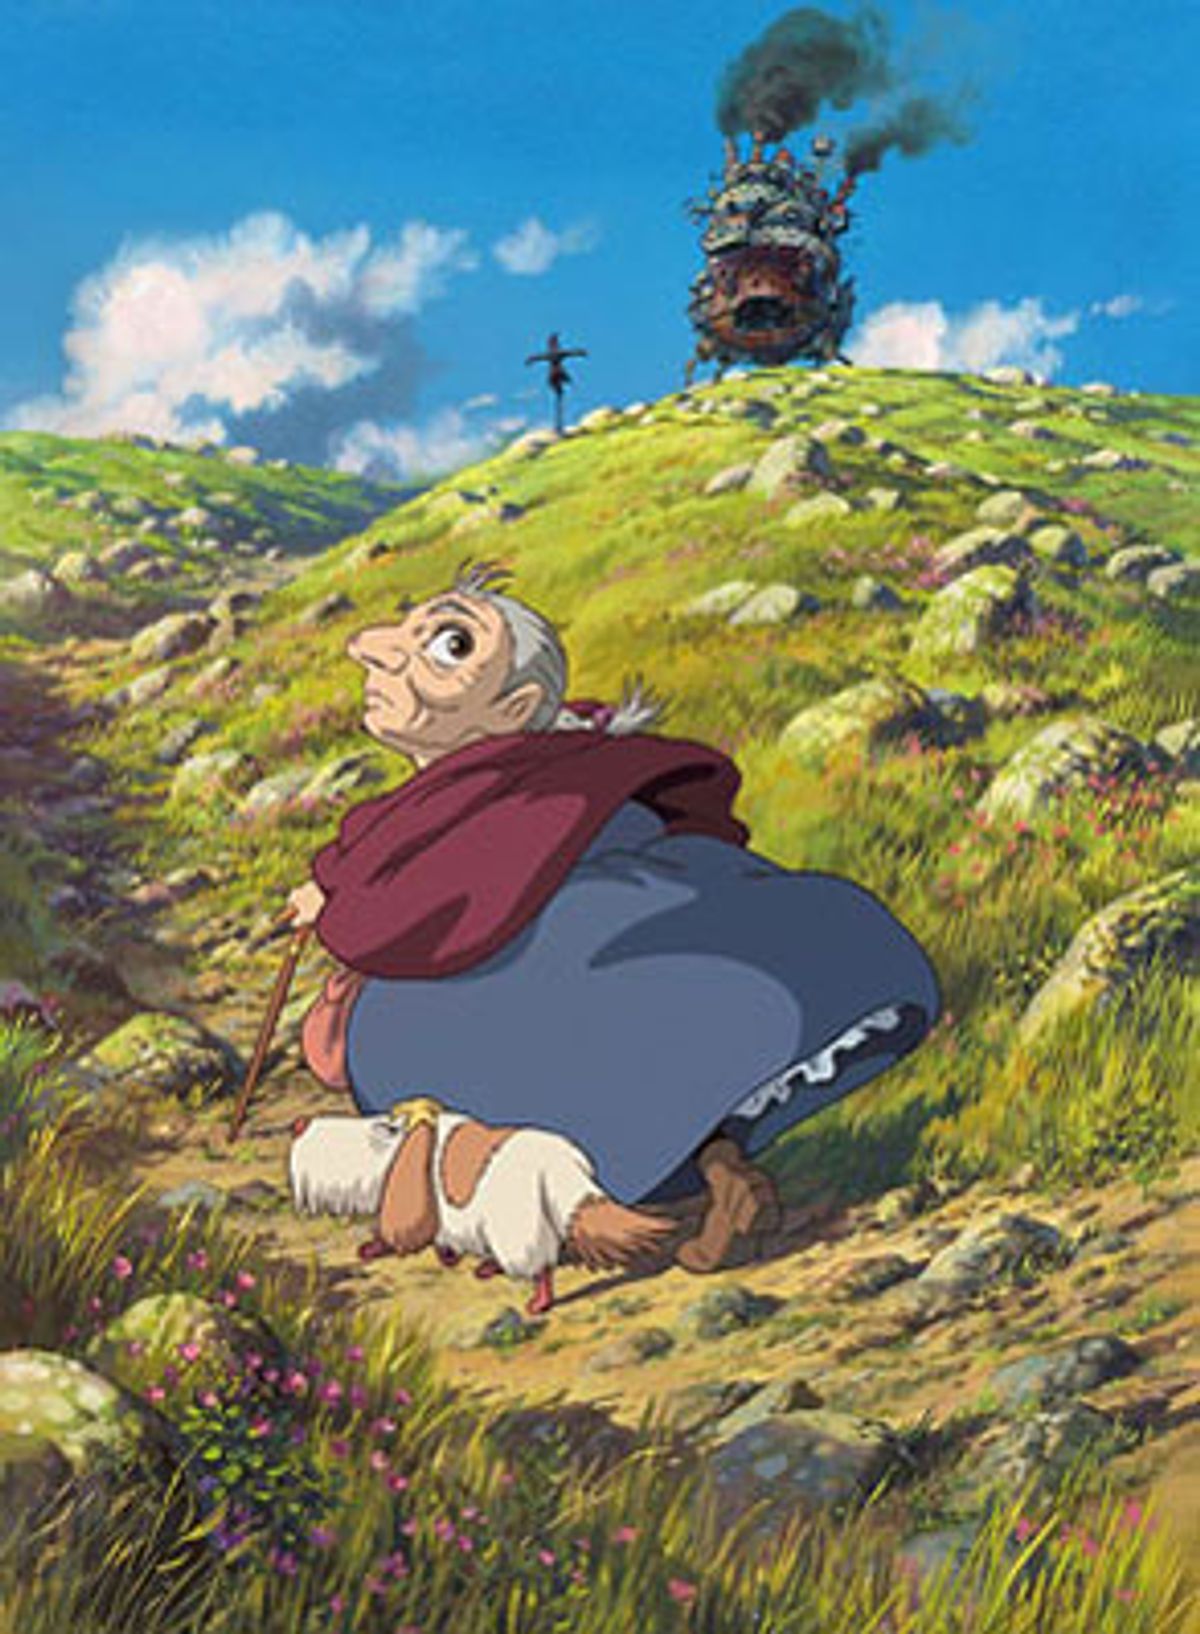 Howls Moving Castle Characters Books vs Movie